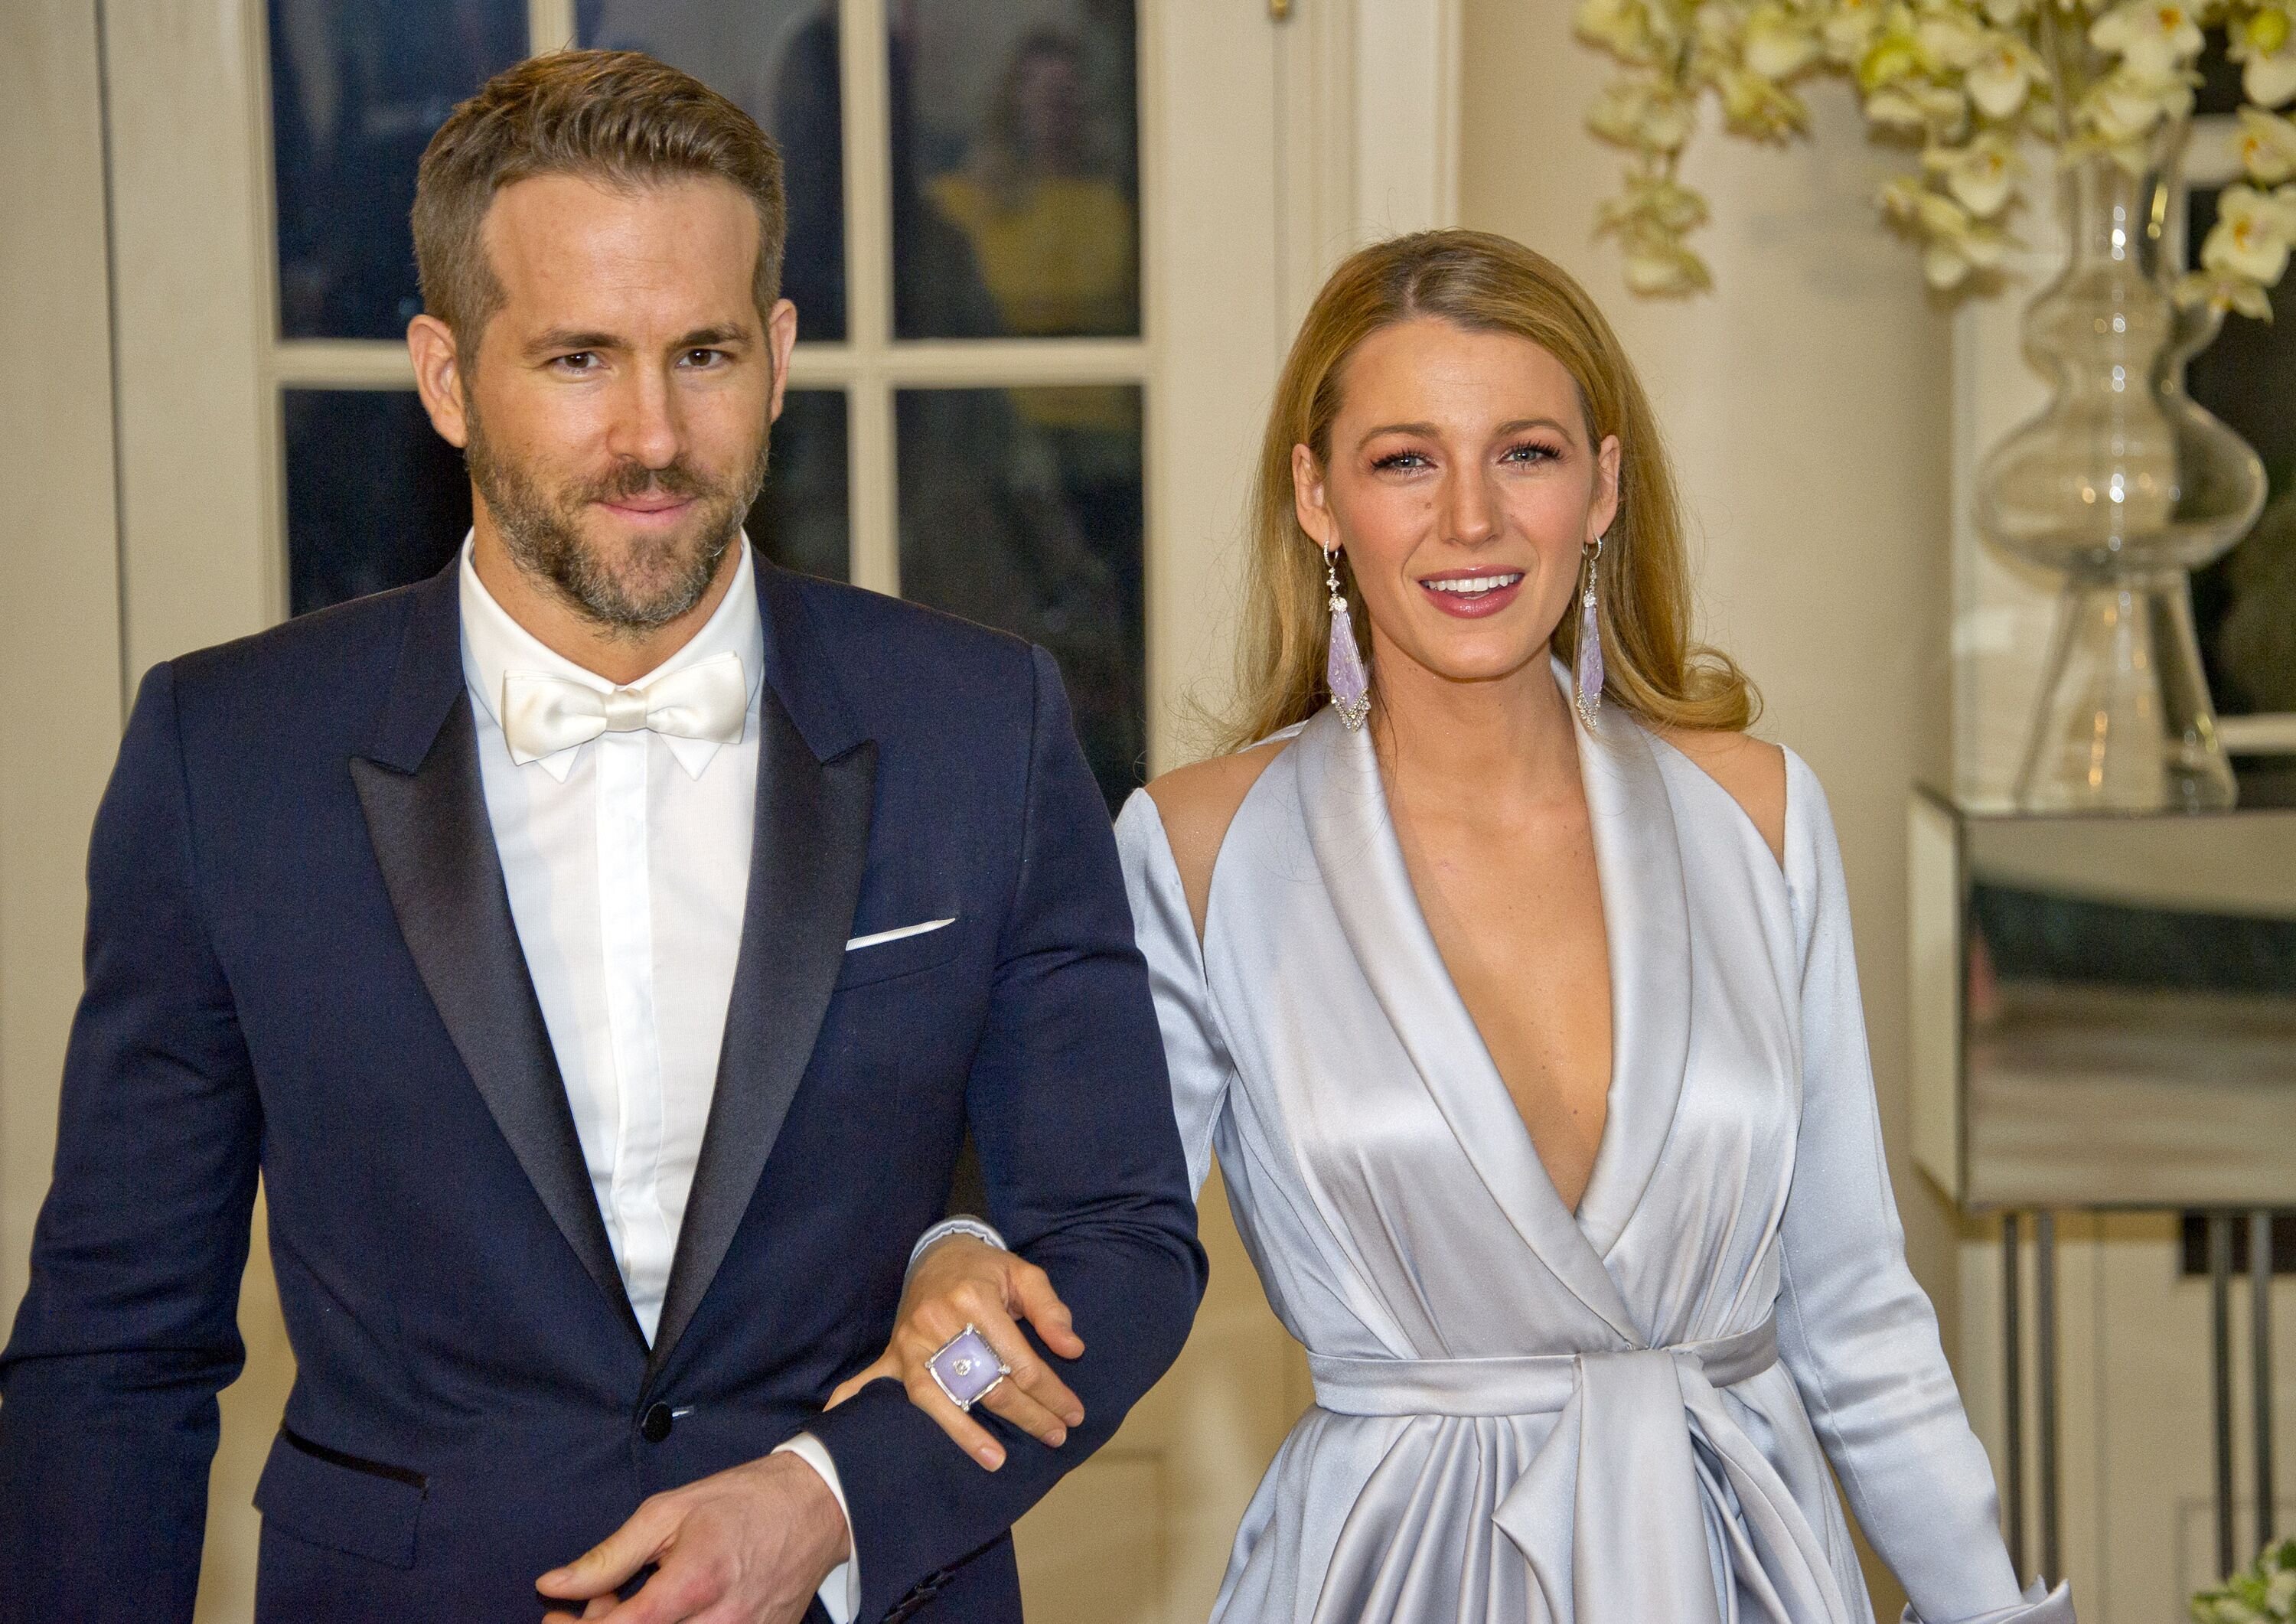 Ryan Reynolds and Blake Lively arrive for the State Dinner in honor of Prime Minister Trudeau and Mrs. Sophie Trudeau of Canada at the White House March 10, 2016 in Washington, DC | Photo: Getty Images